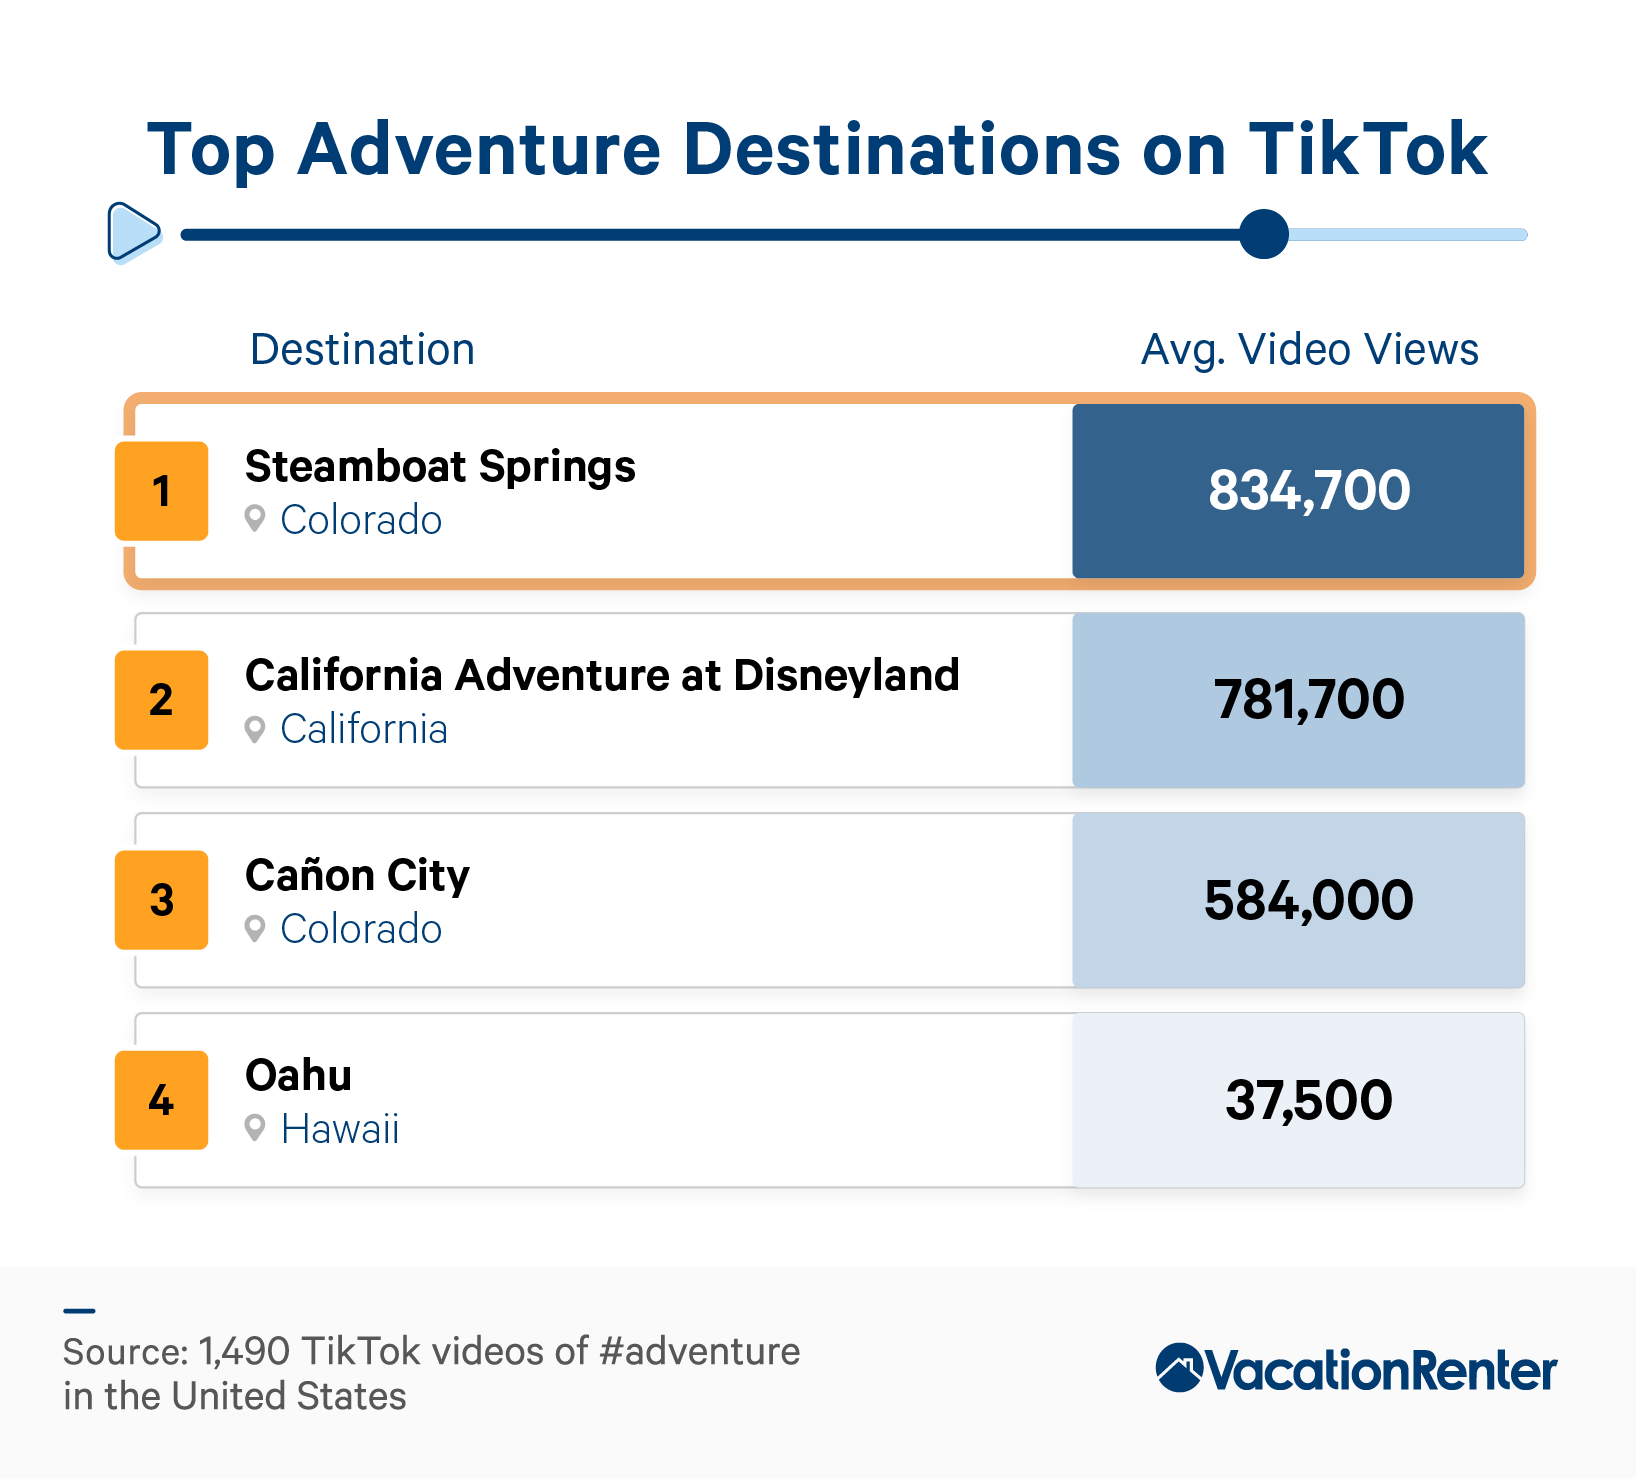 Ranking of some of the hottest adventure destinations on TikTok